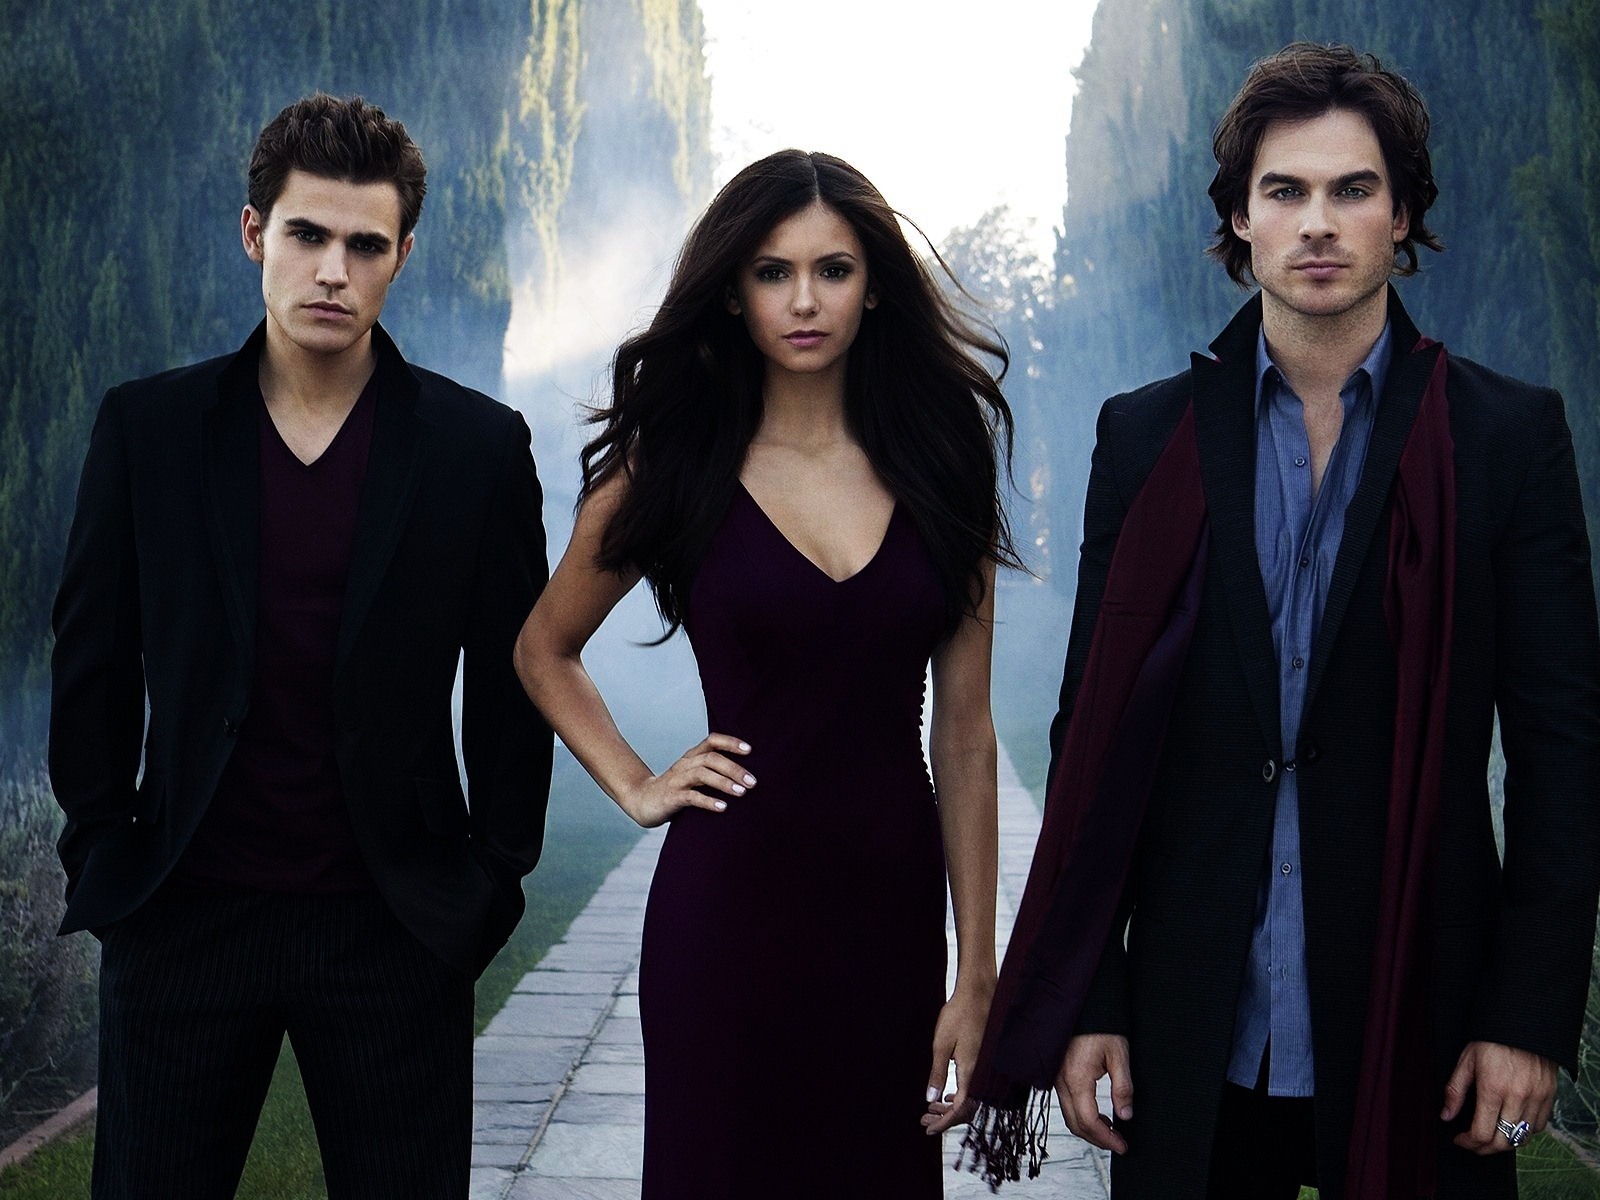 The Vampire Diaries HD Wallpapers #6 - 1600x1200